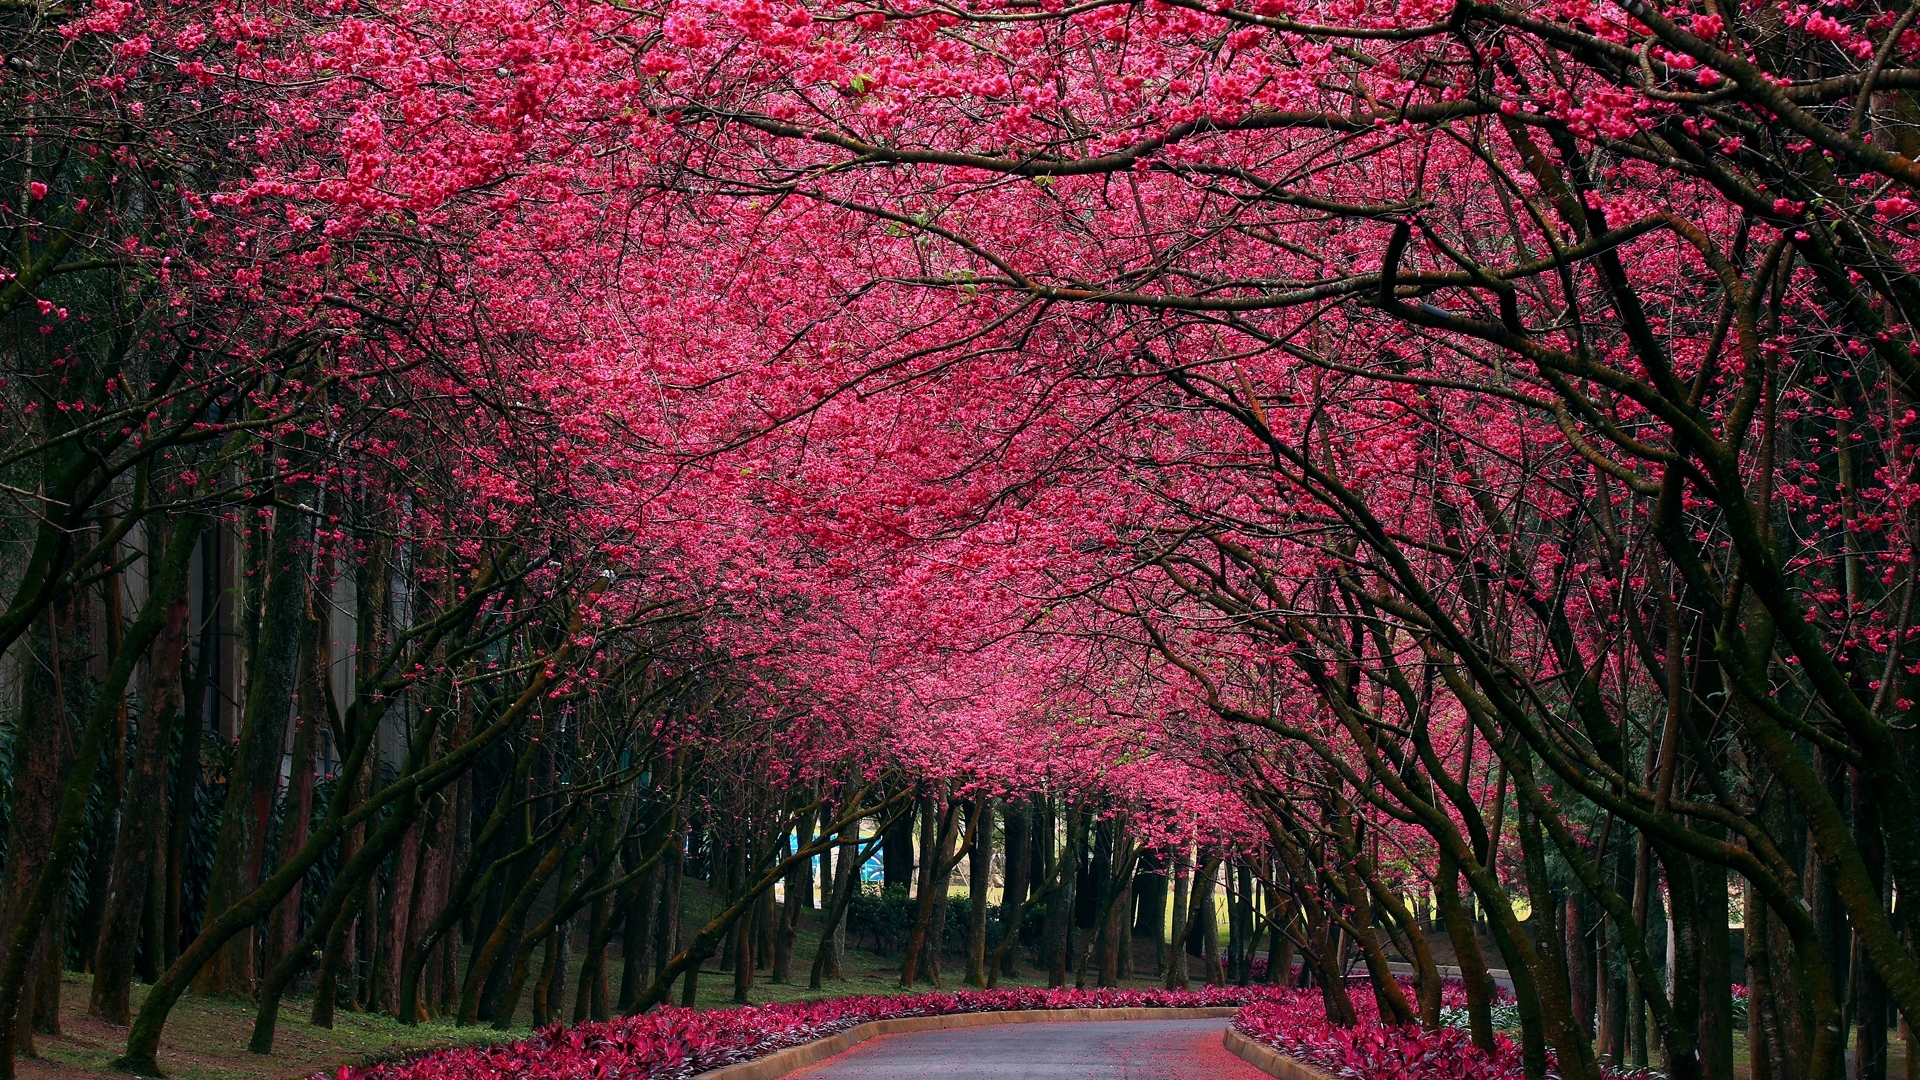 New Lock Screen Wallpapers landscape, trees, streets, red